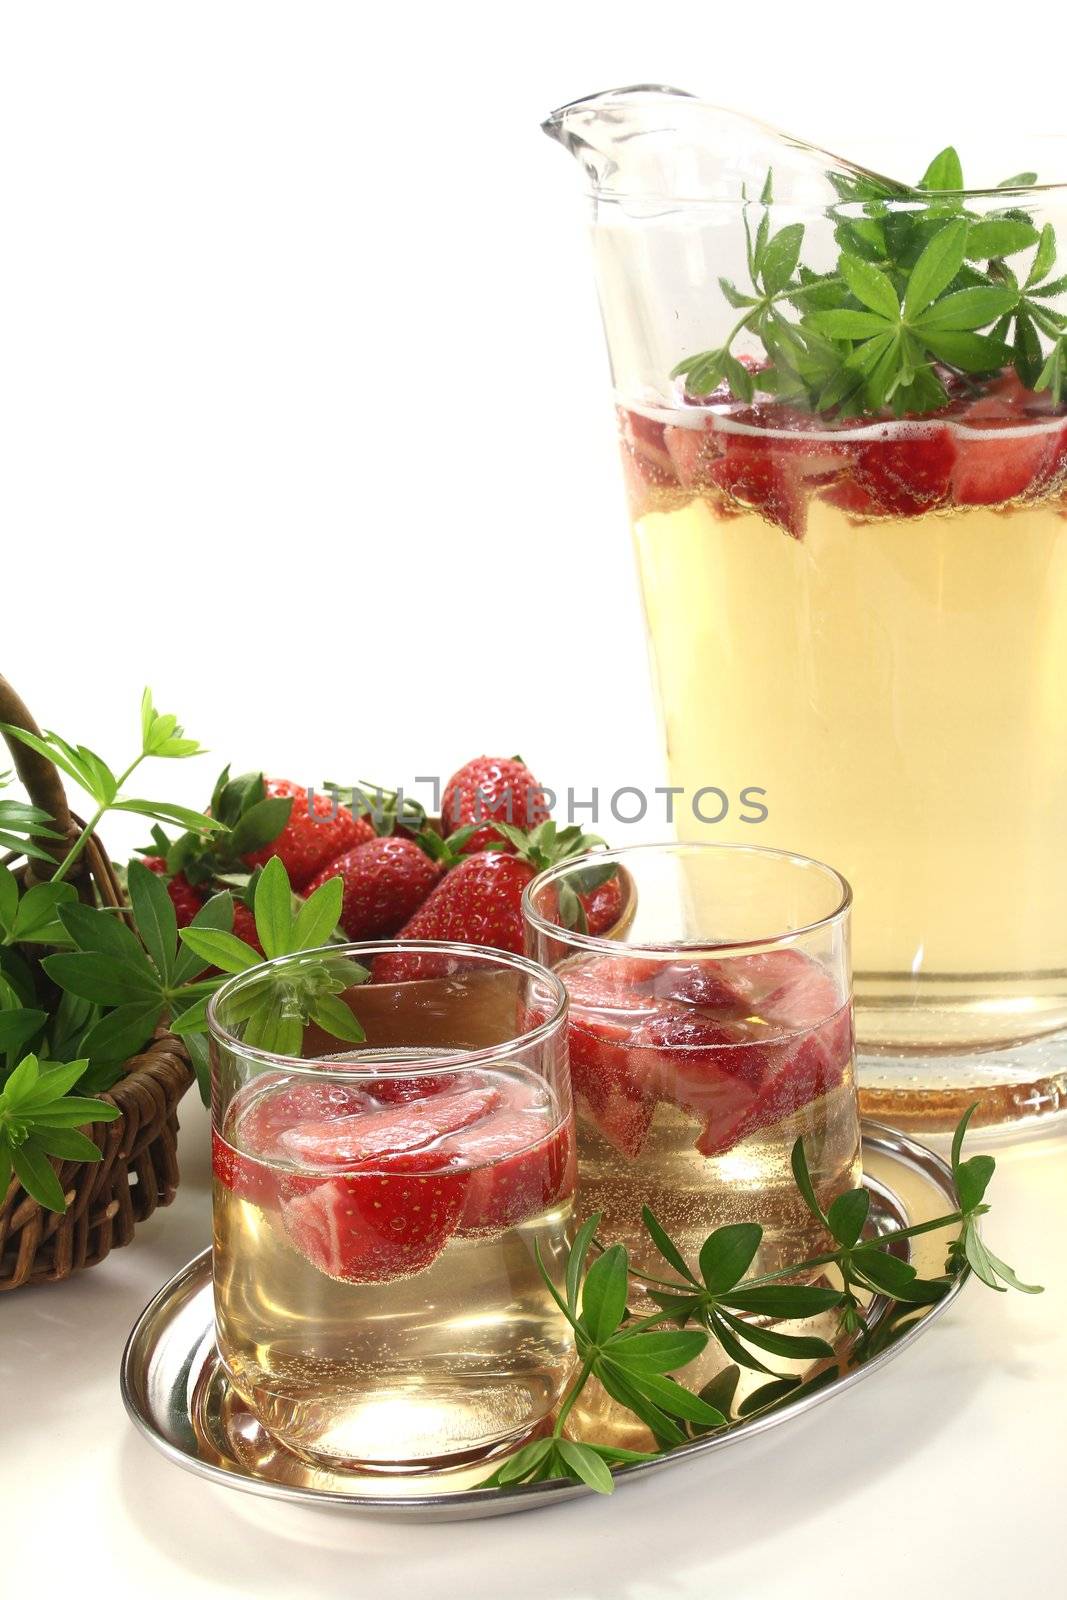 fresh May wine with strawberries and woodruff on a light background